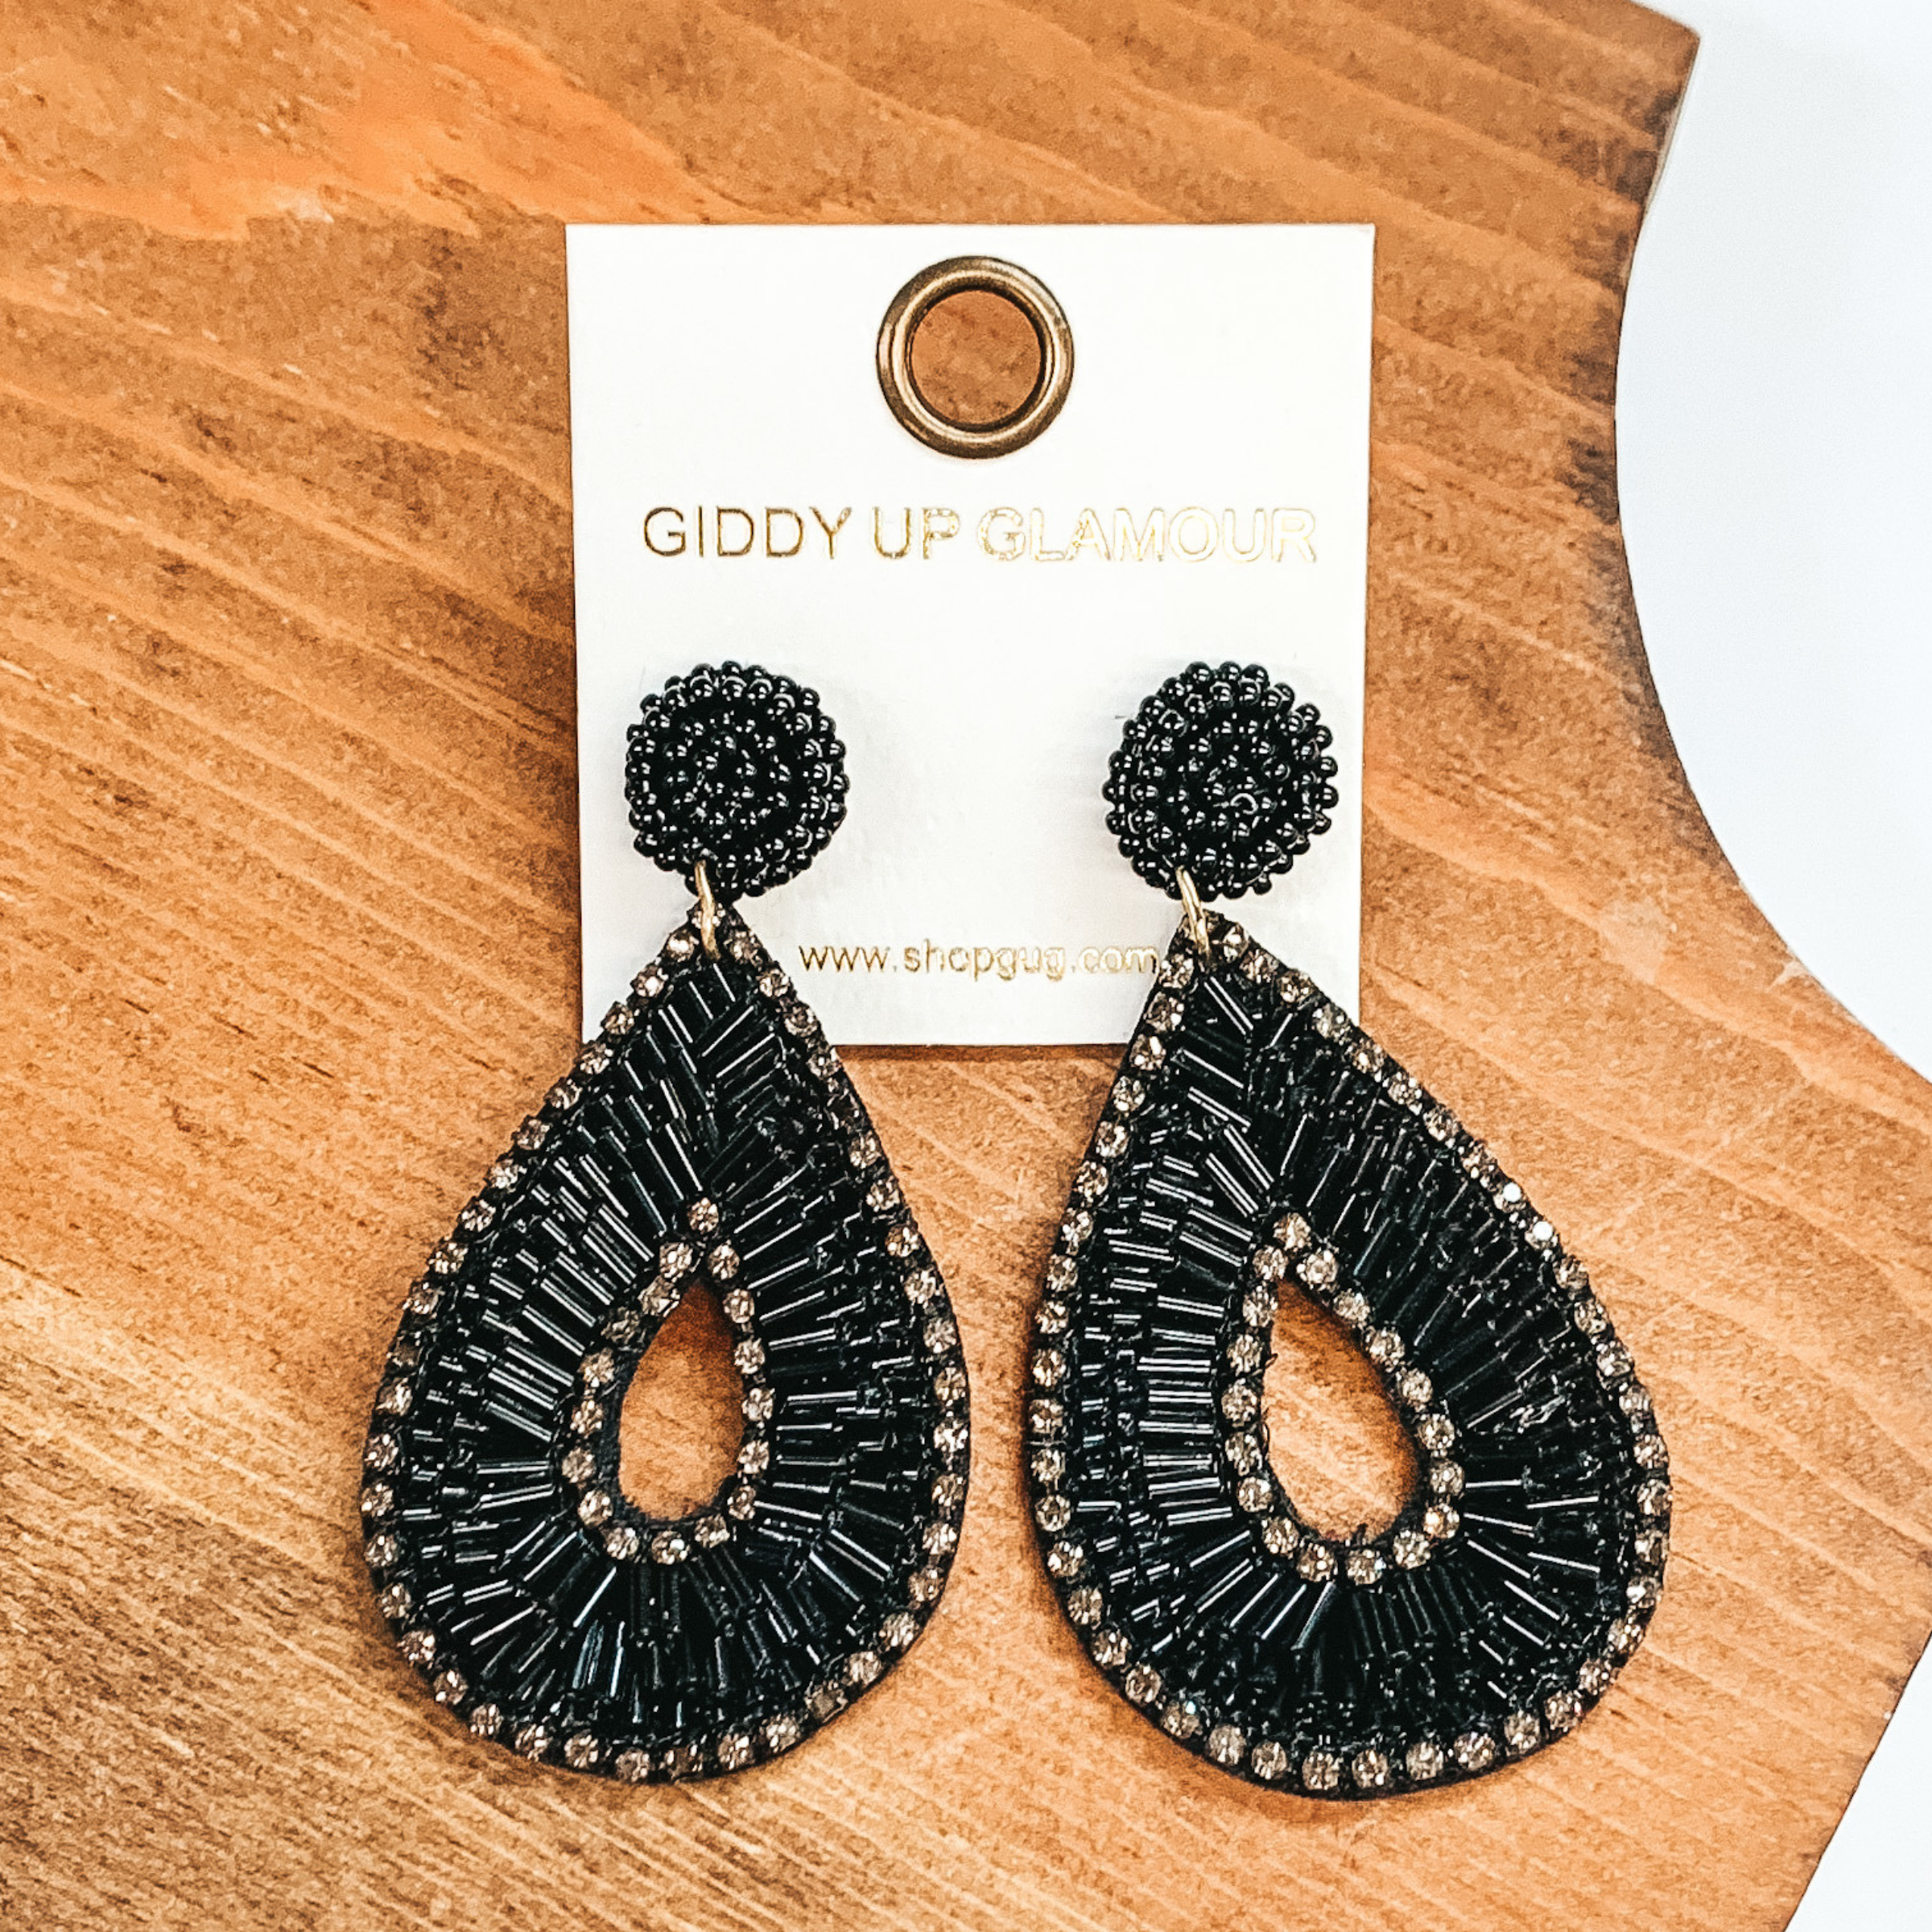 Black bugle beaded earrings in teardrop shape. Outlined with dark grey crystals and in the middle, with black bugle beads in between. These earrings  are pictured on a brown block and a white background.